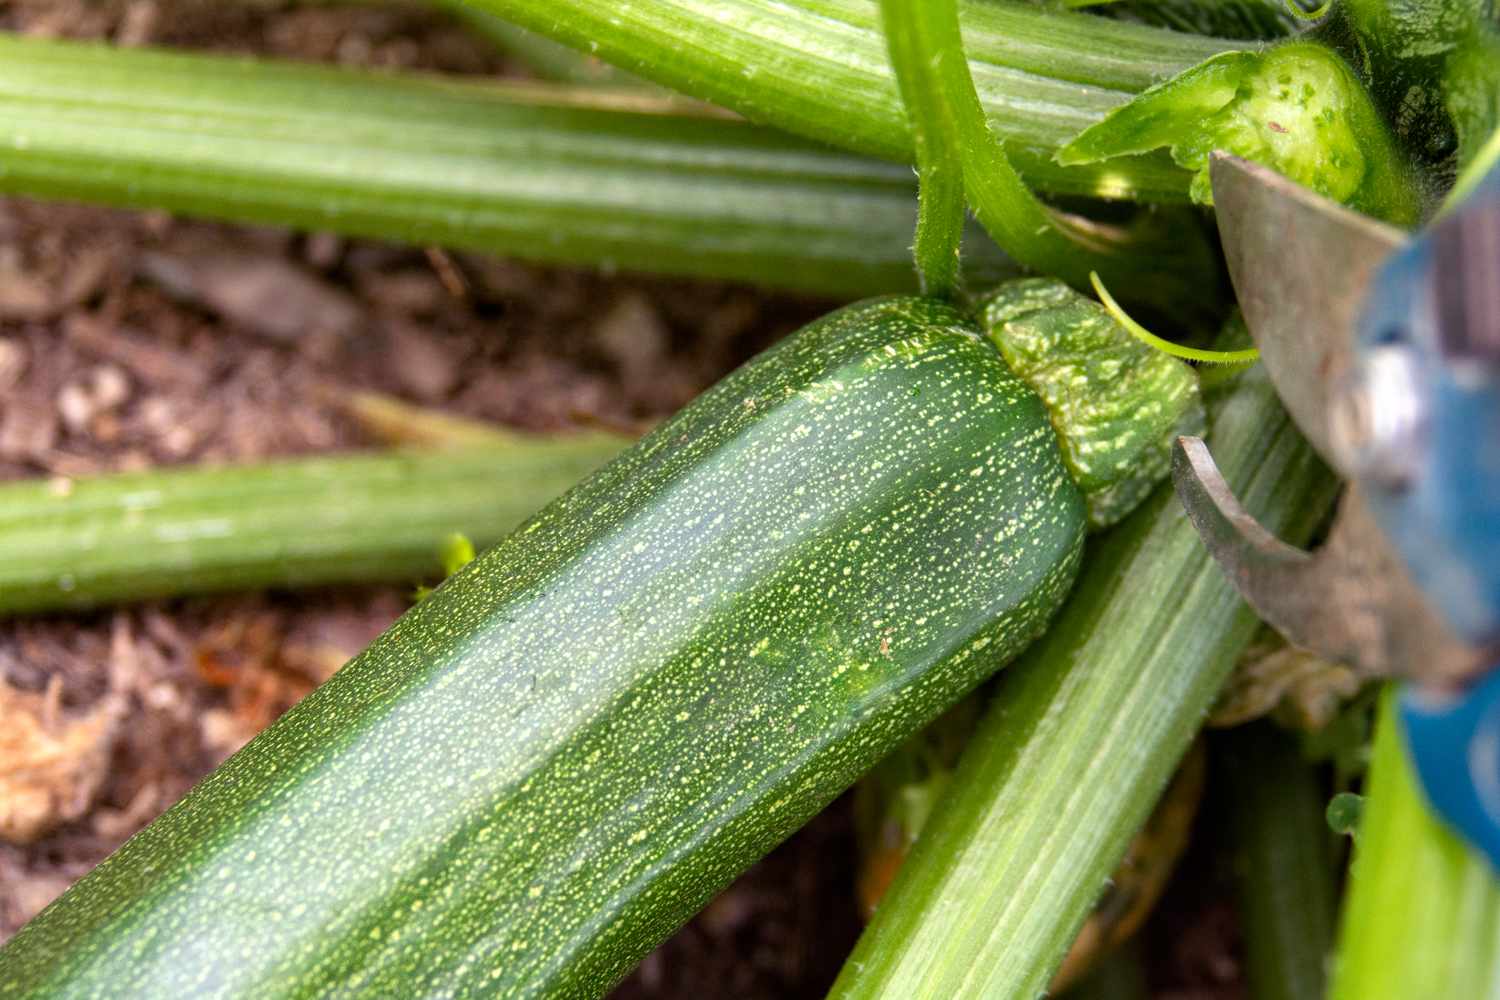 Zucchini fruit attached to plant stems closeup